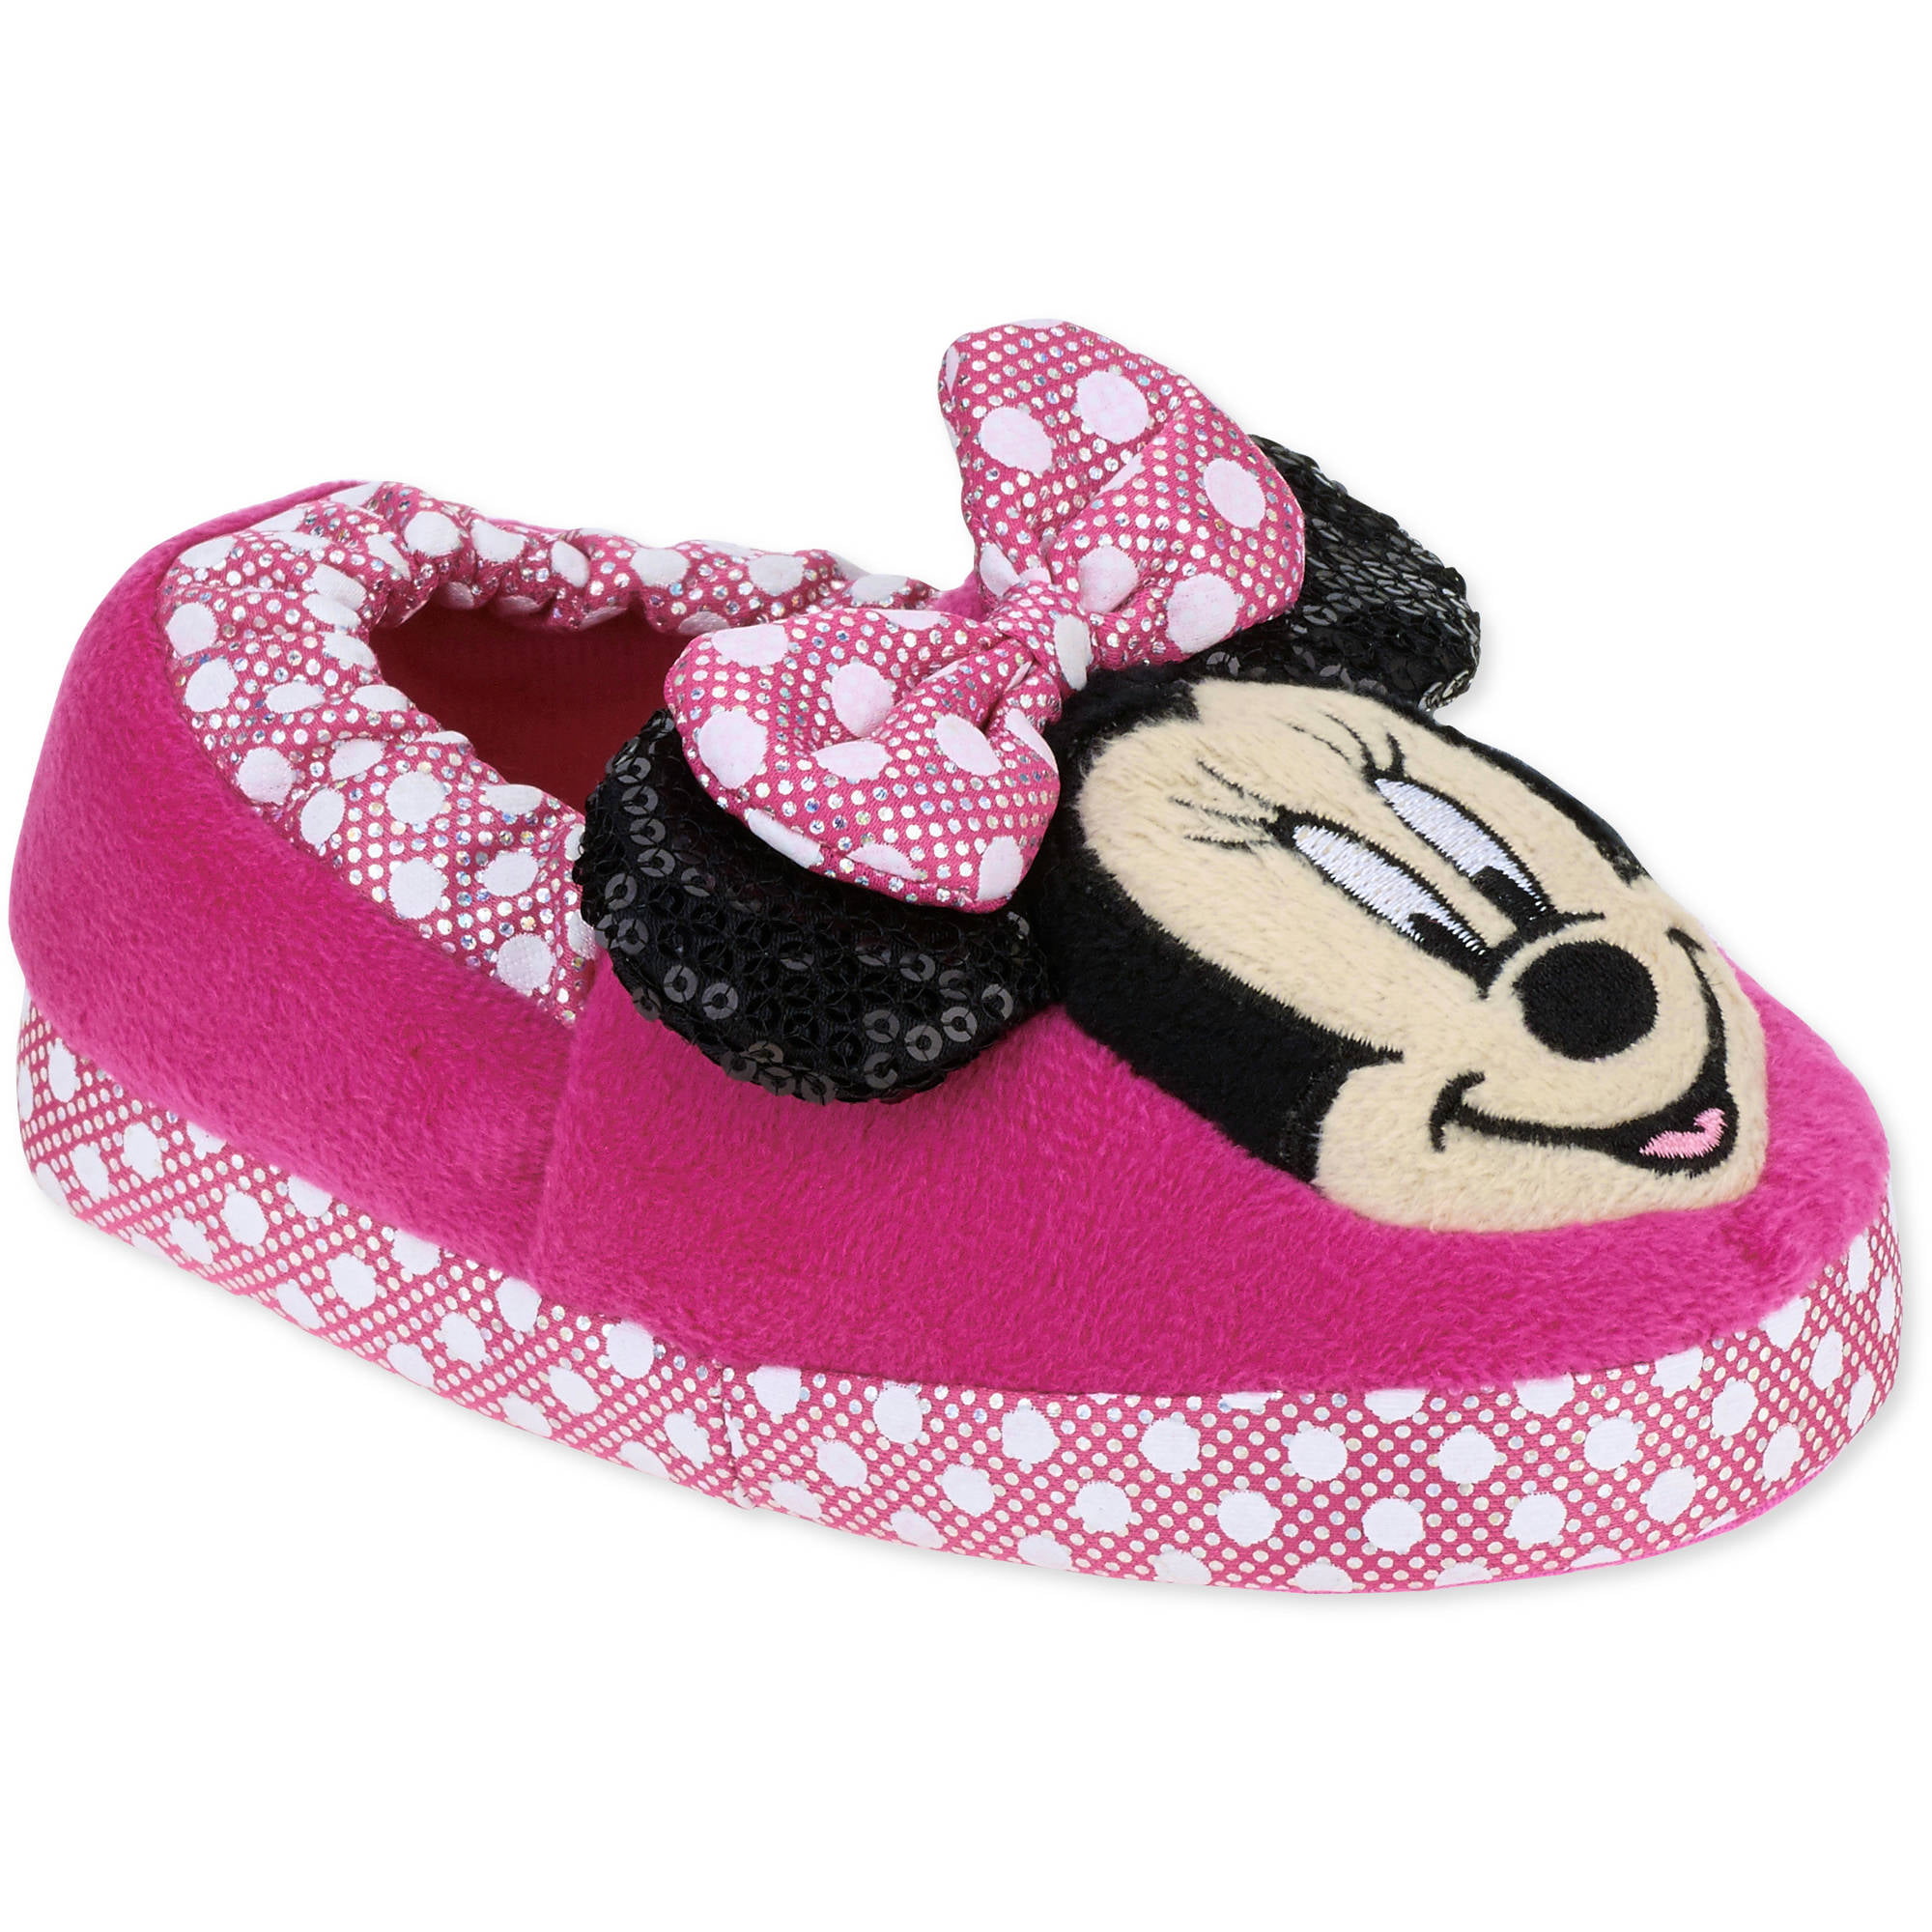 size 9 kids slippers